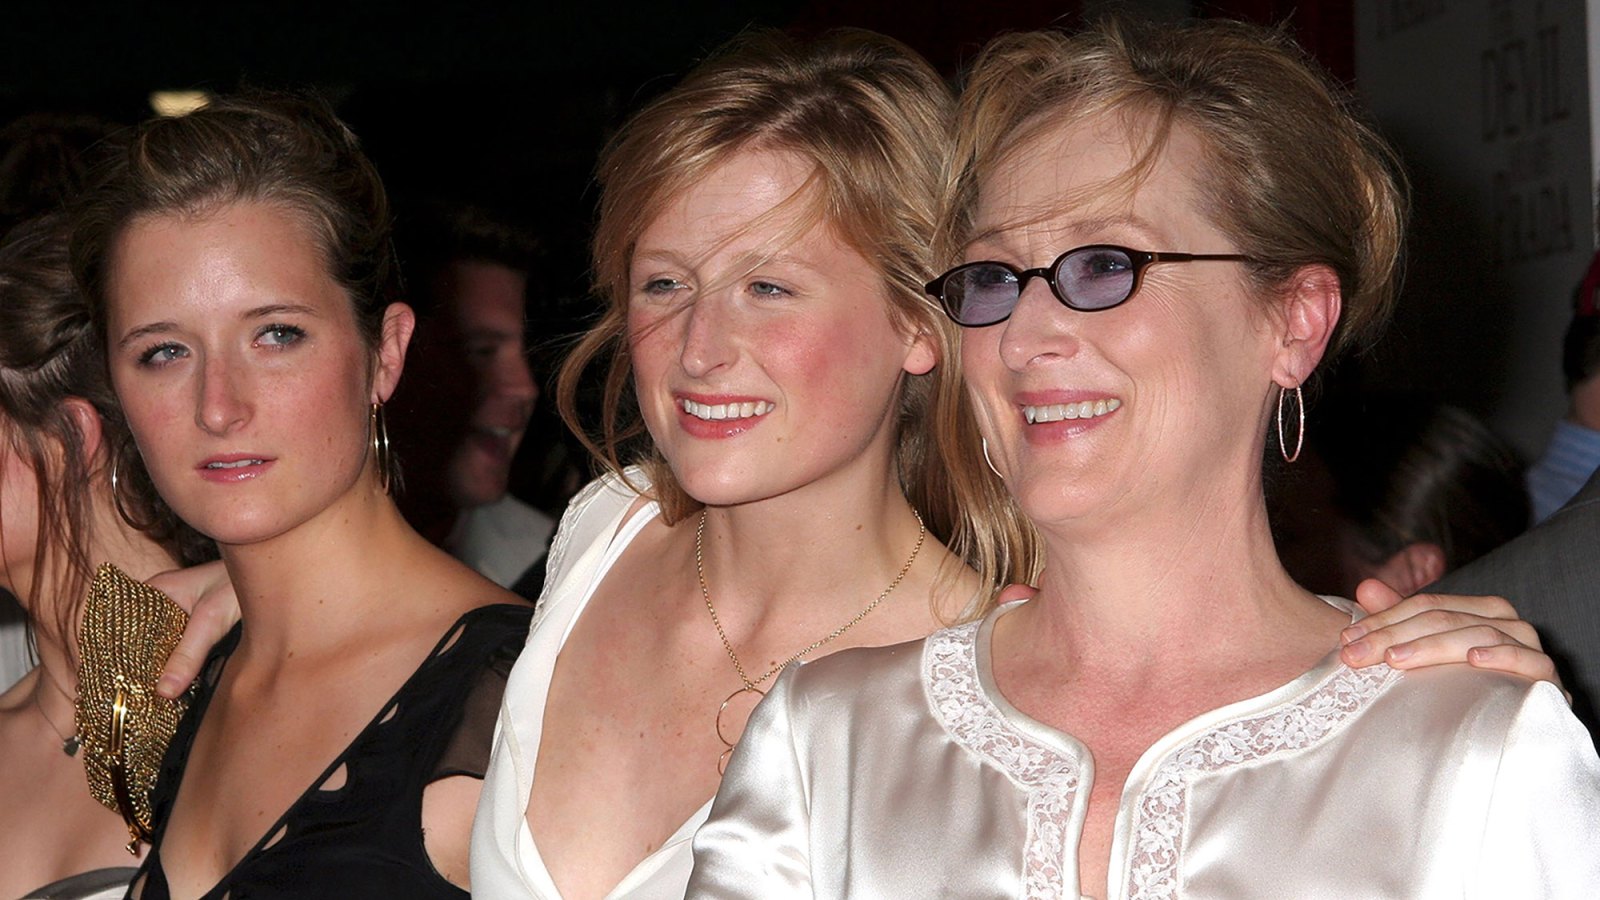 Mamie, Grace Gummer Look Just Like Mom Meryl Streep at a Young Age